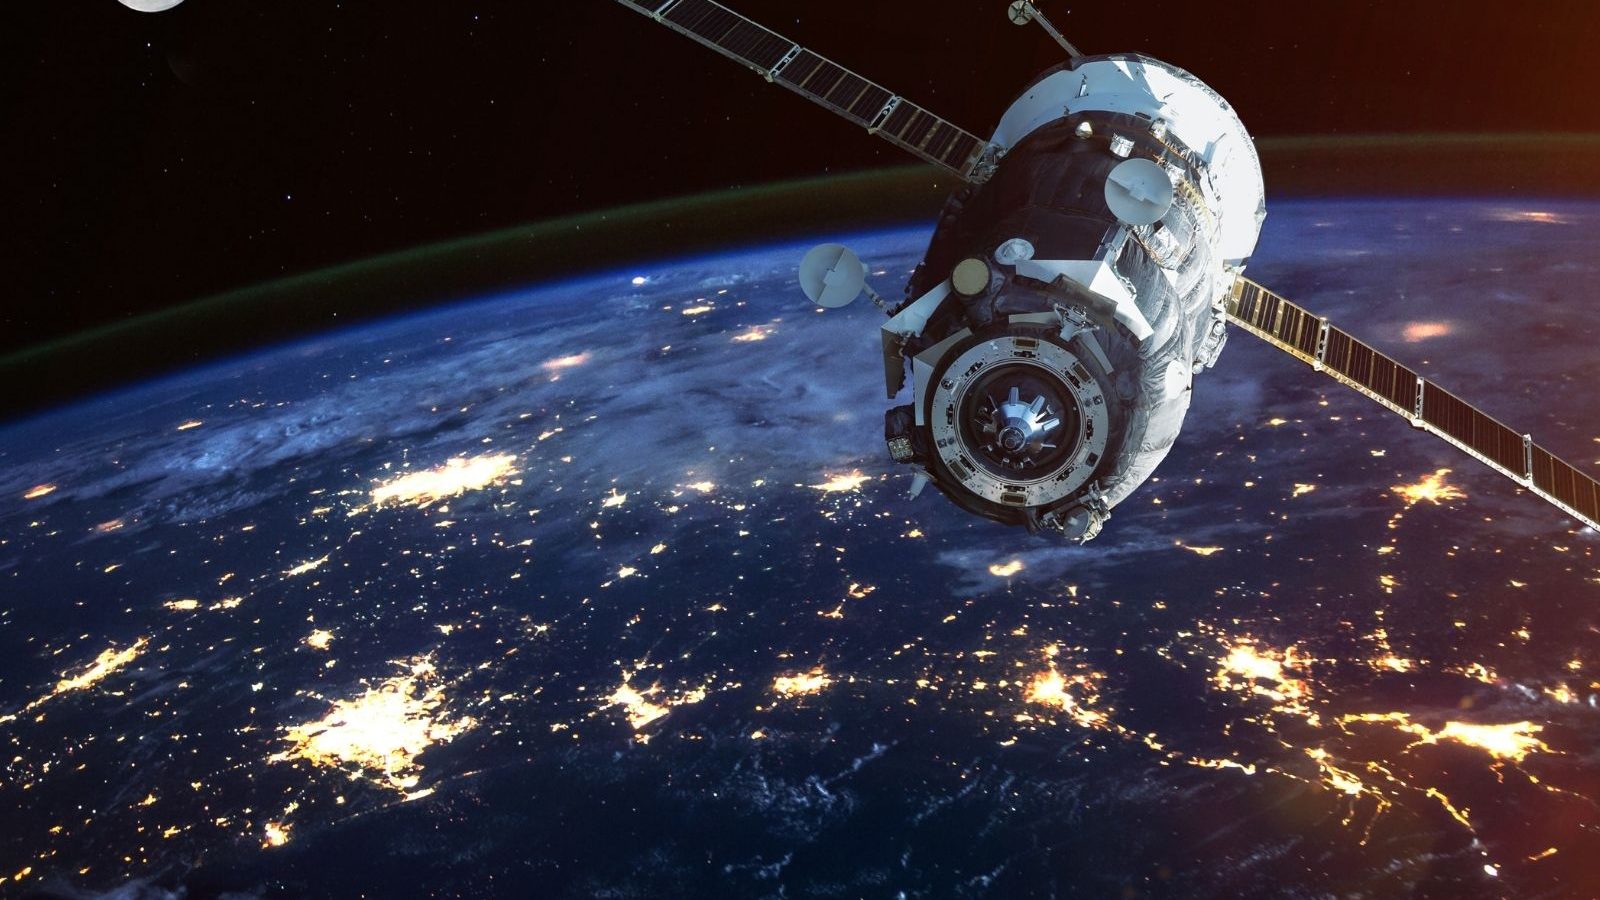 How Many Satellites are Orbiting the Earth Right Now? The Correct